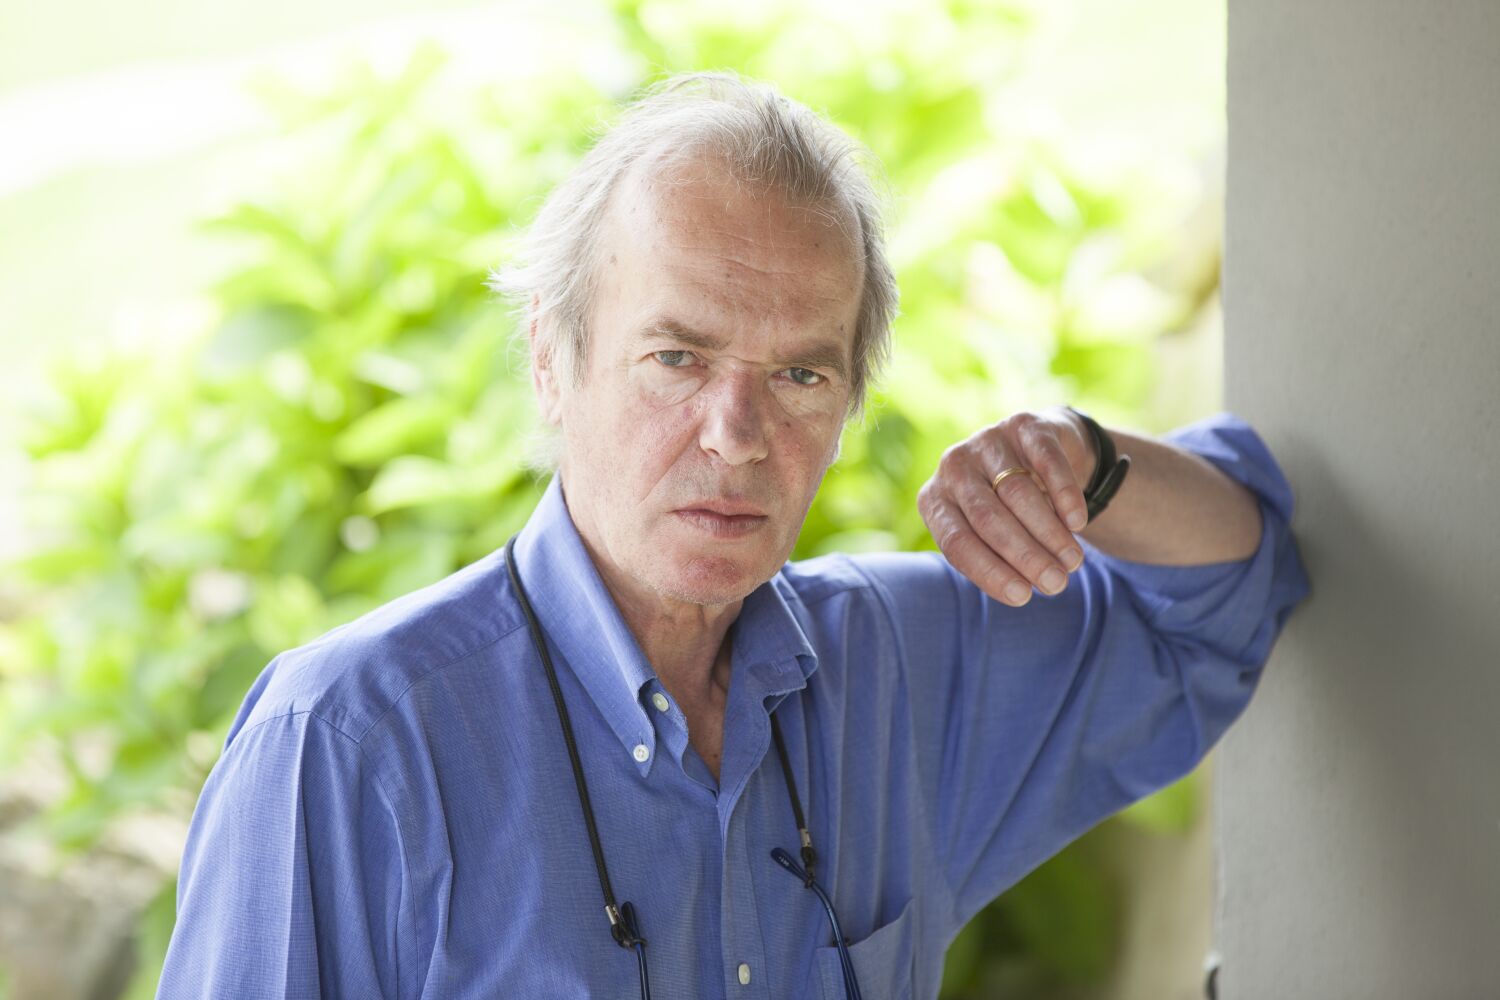 Martin Amis, acclaimed British novelist and London scenester of '80s and '90s, dies at 73